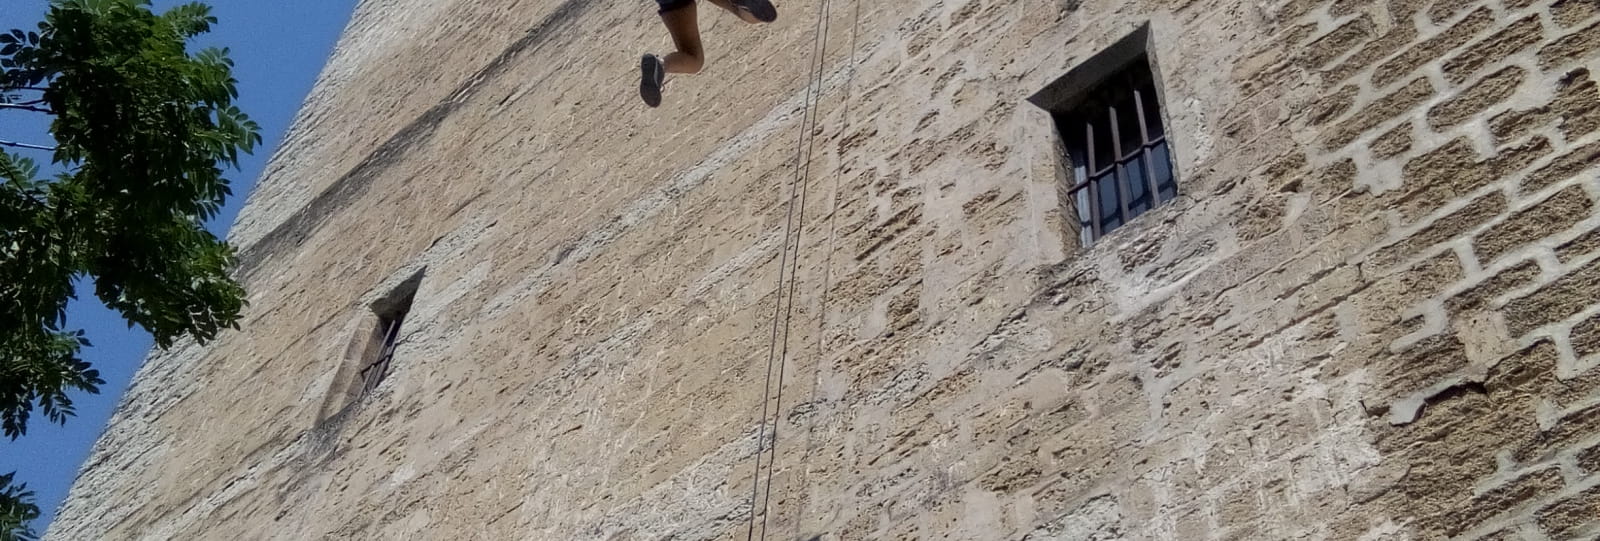 Abseiling from the Tour de Crest